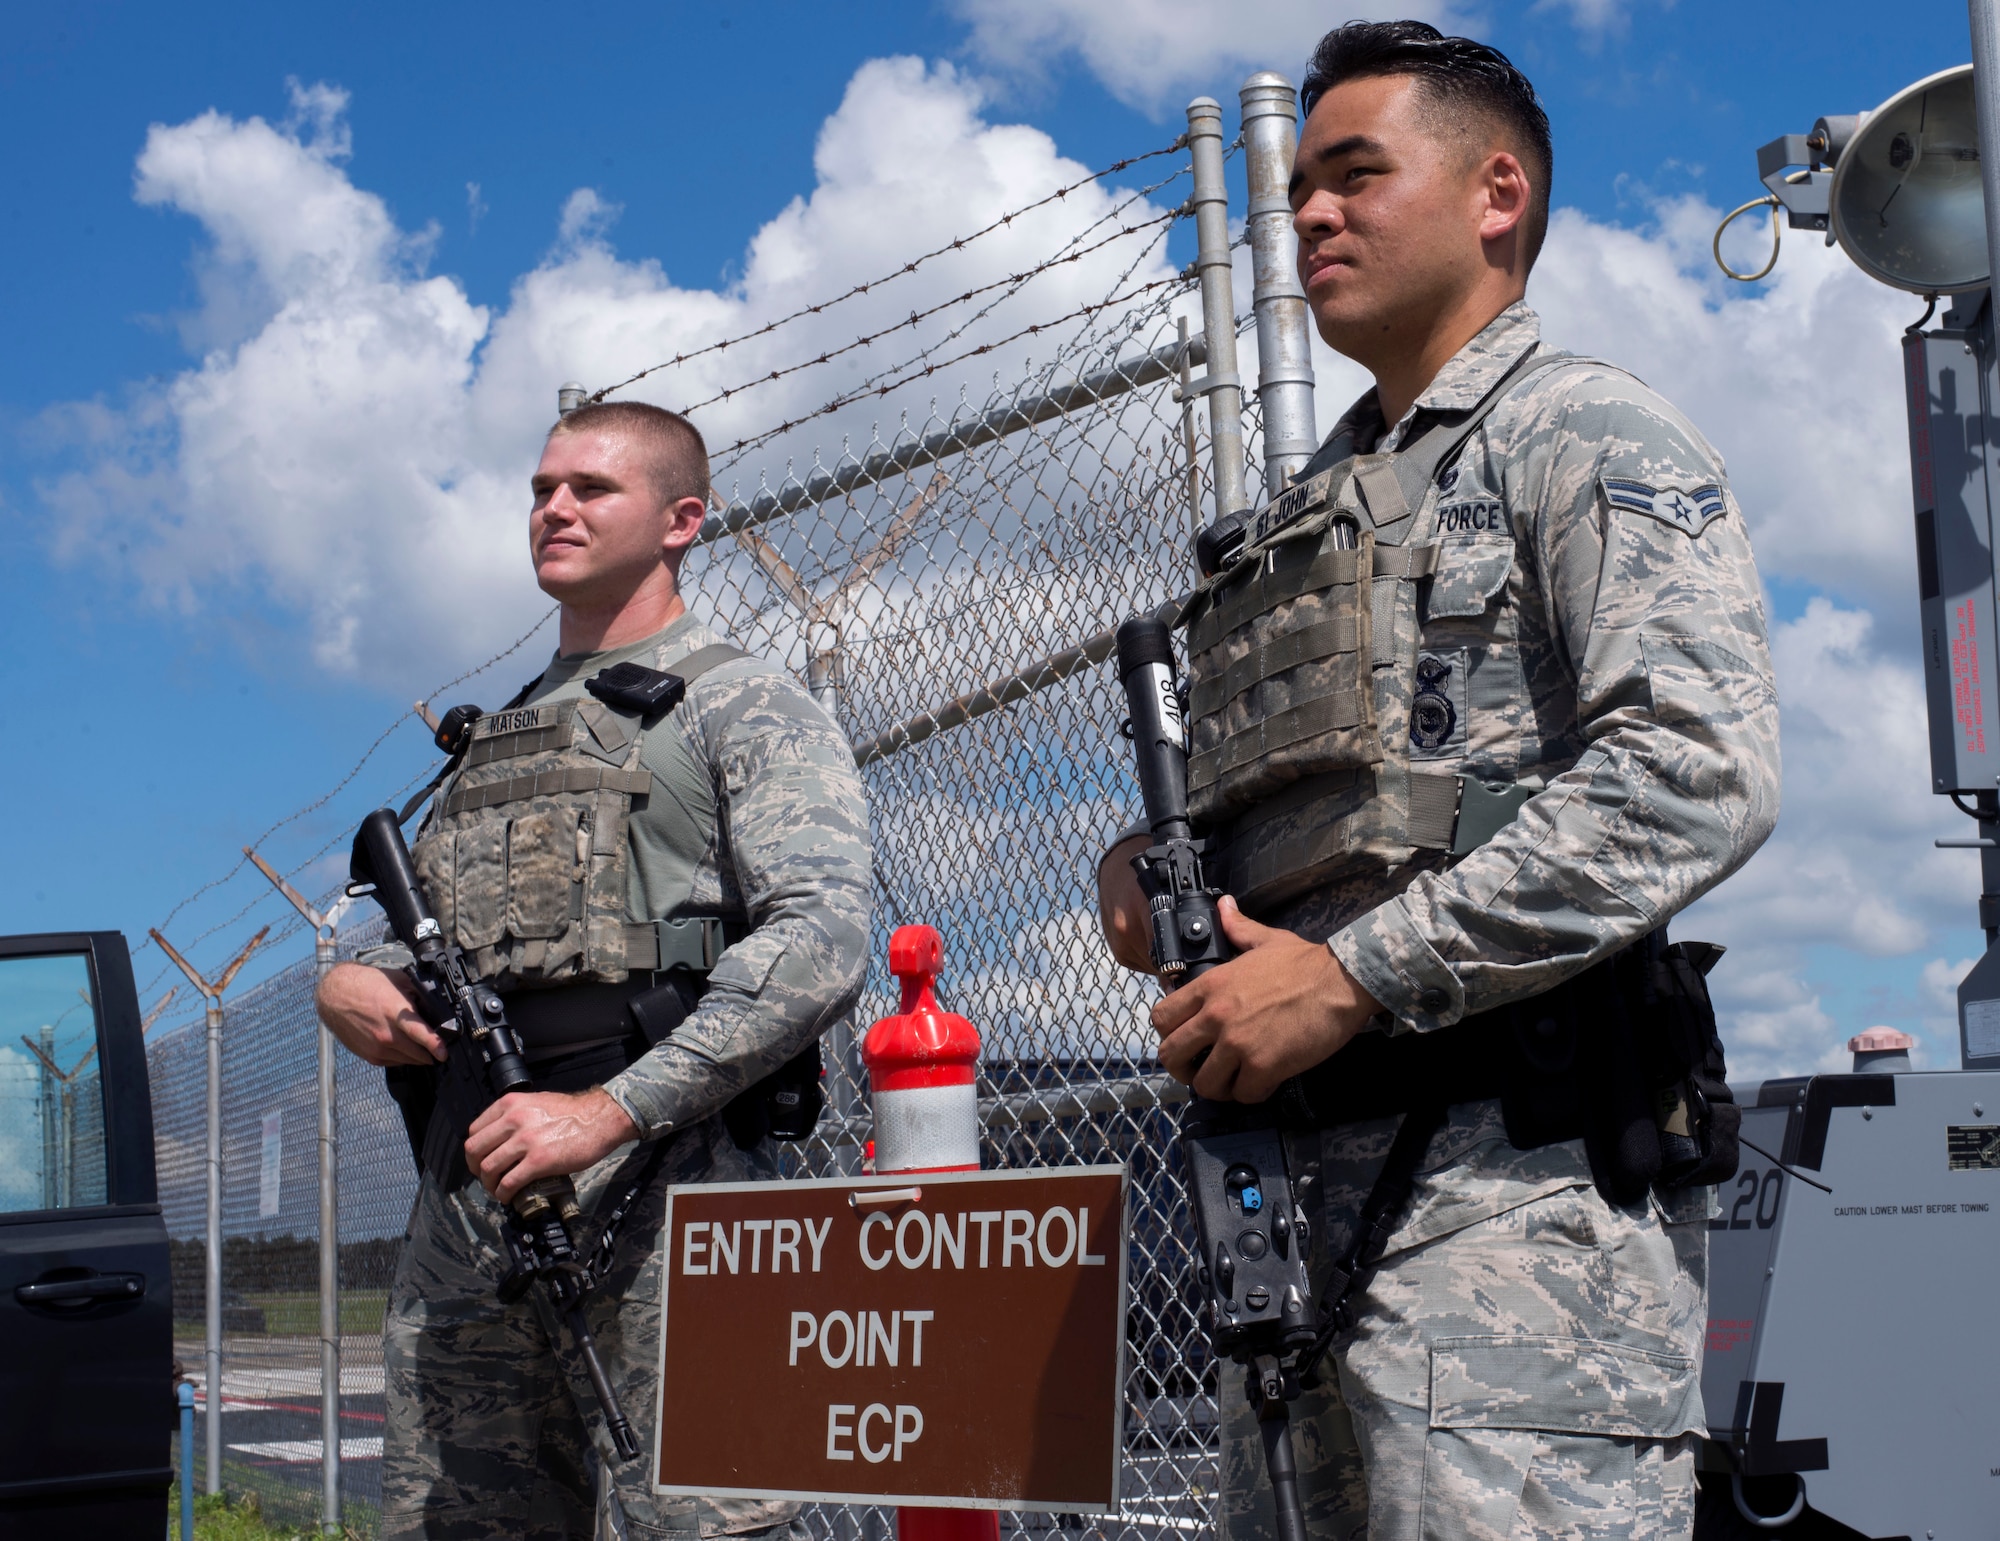 U.S. Air Force Senior Airman Timothy Matson, left, and Airman 1st Class Randall St. John, right, entry controllers assigned to the 6th Security Forces Squadron, watch over a simulated entry control point during an operational readiness exercise at MacDill Air Force Base, Florida, Sept. 13, 2018.